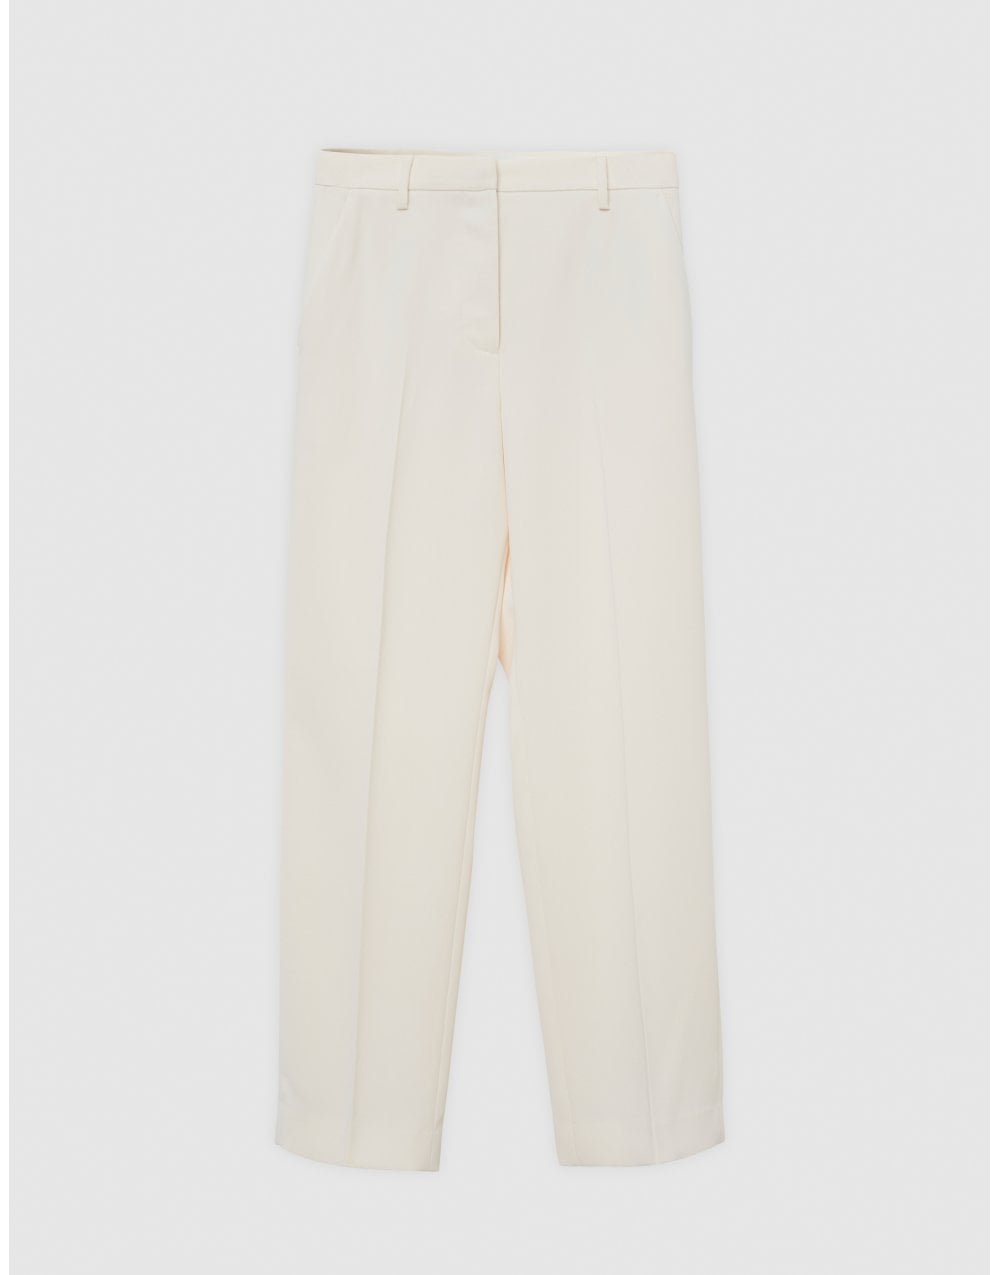 DAY Birger Day Birger Classic Lady Gabardline Trousers Col: Ivory Shade, Size: 40